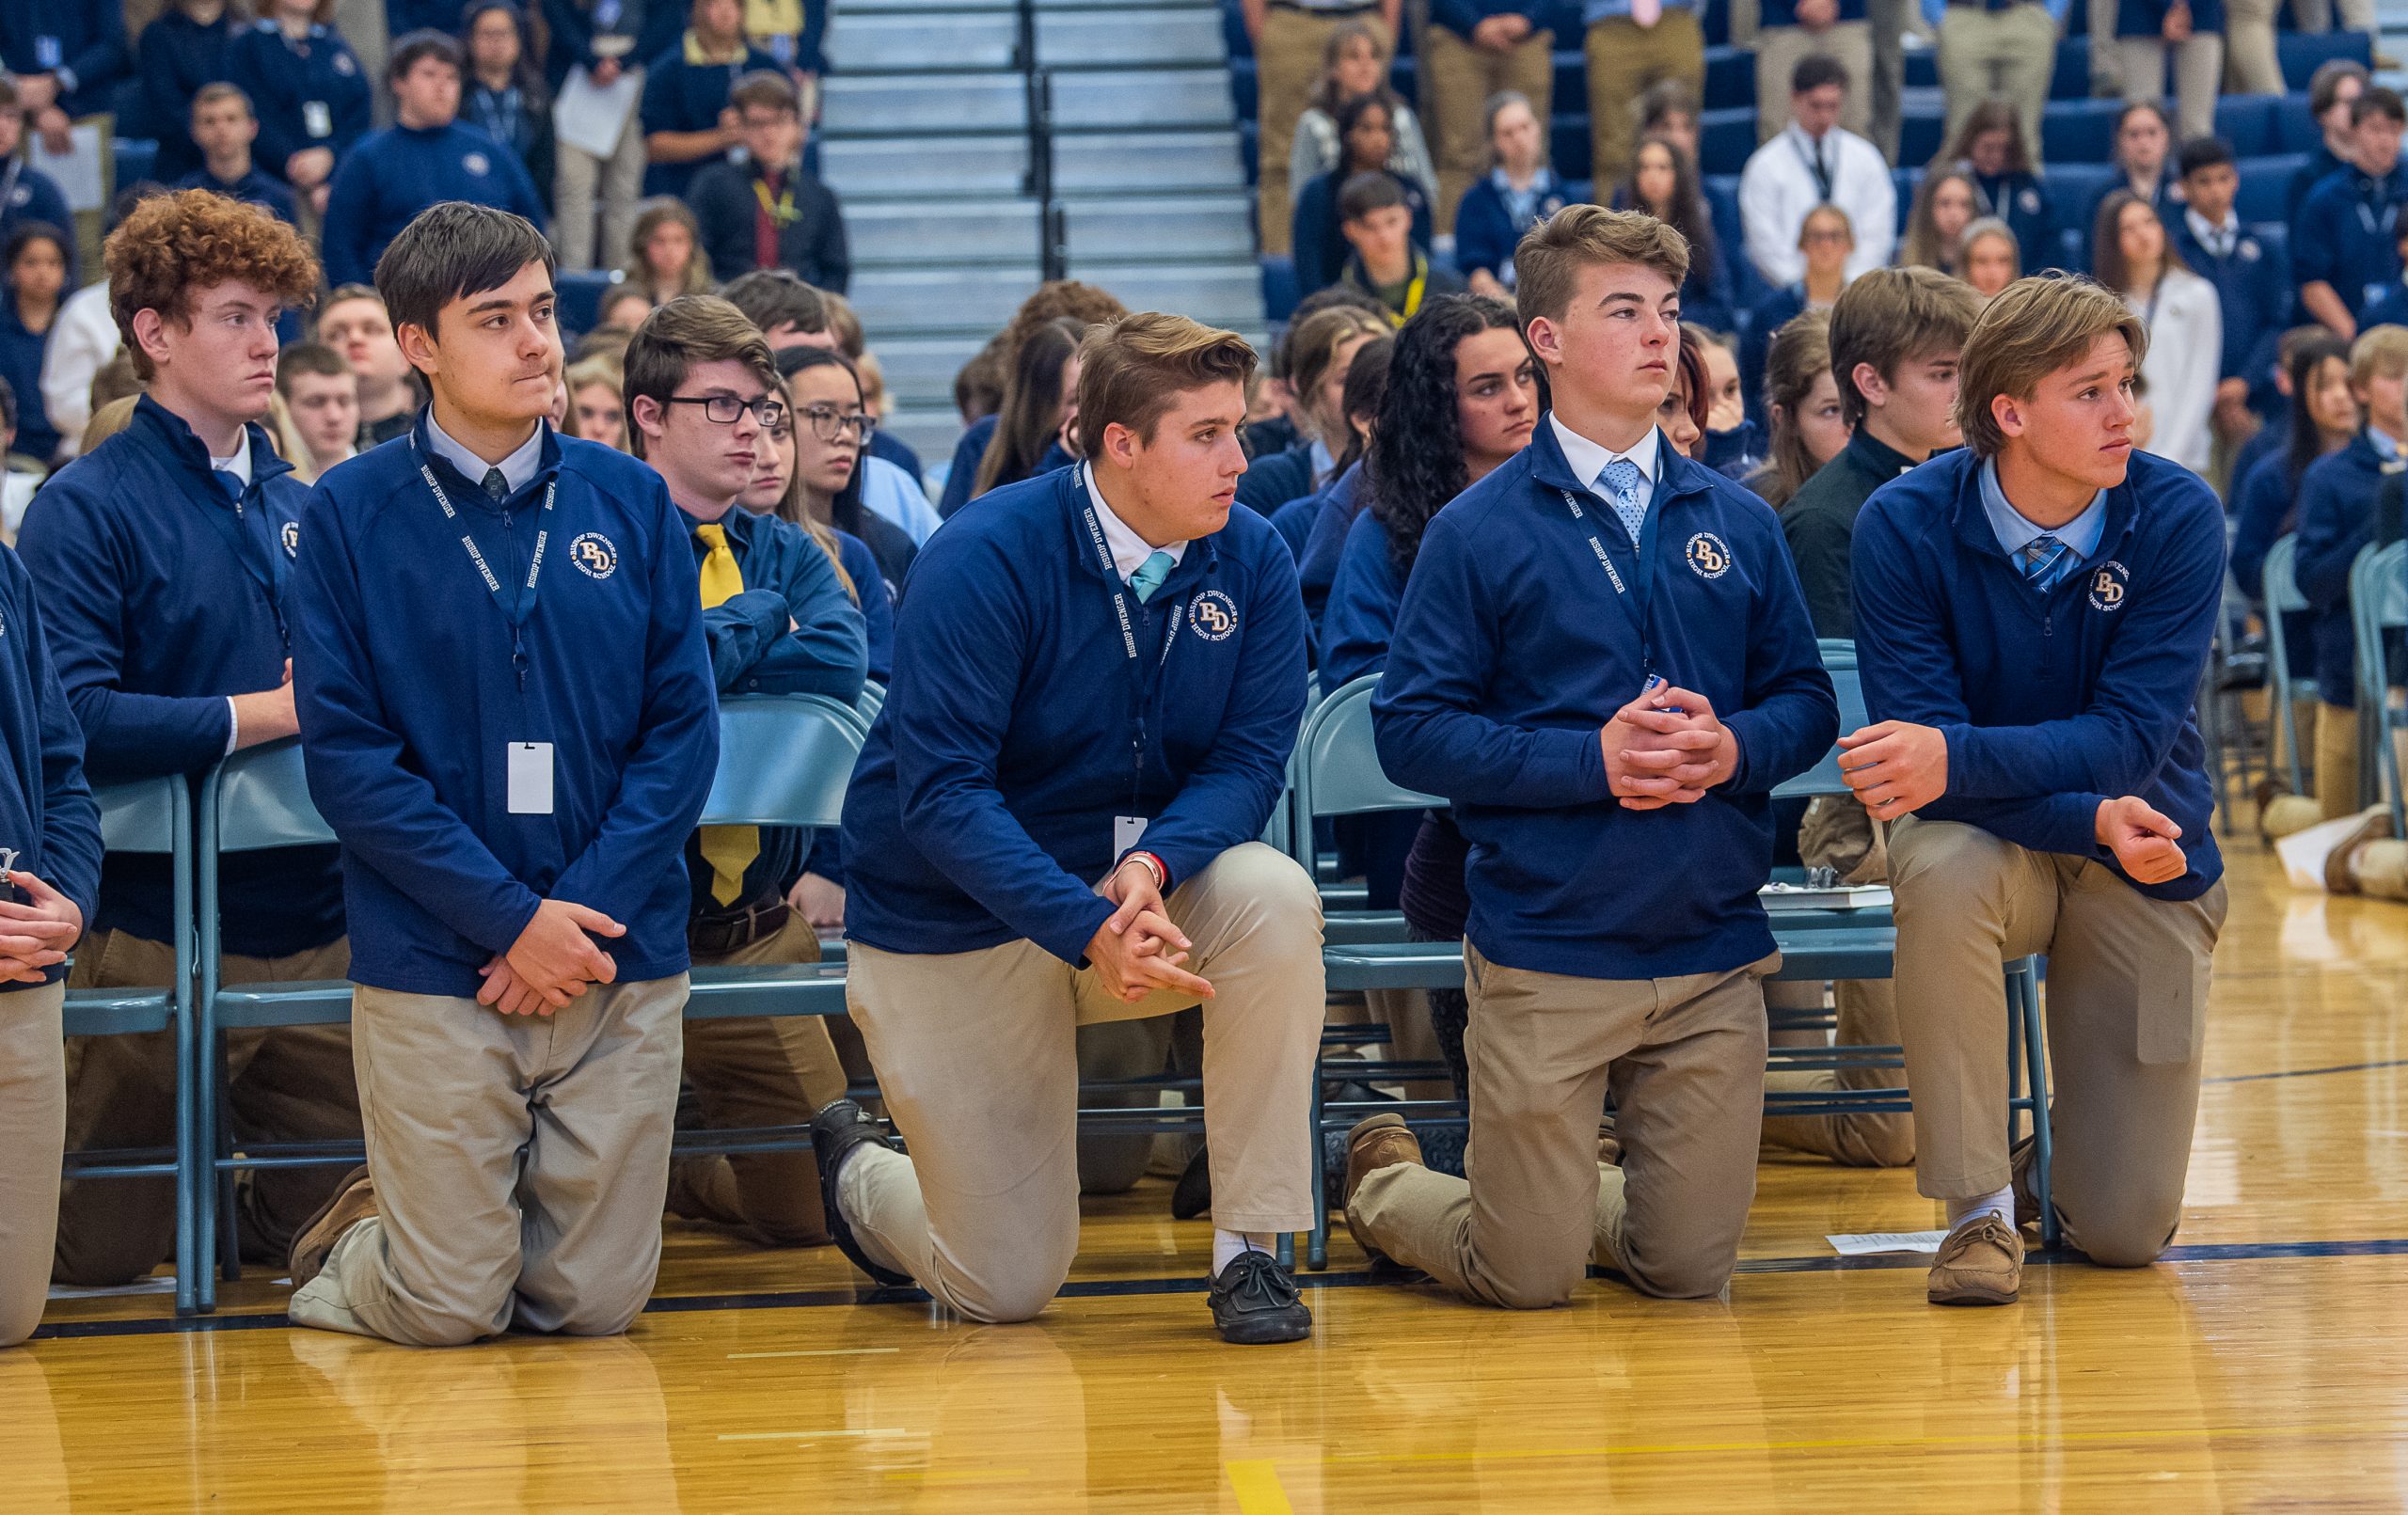 Student interaction highlight of pastoral visit to Dwenger